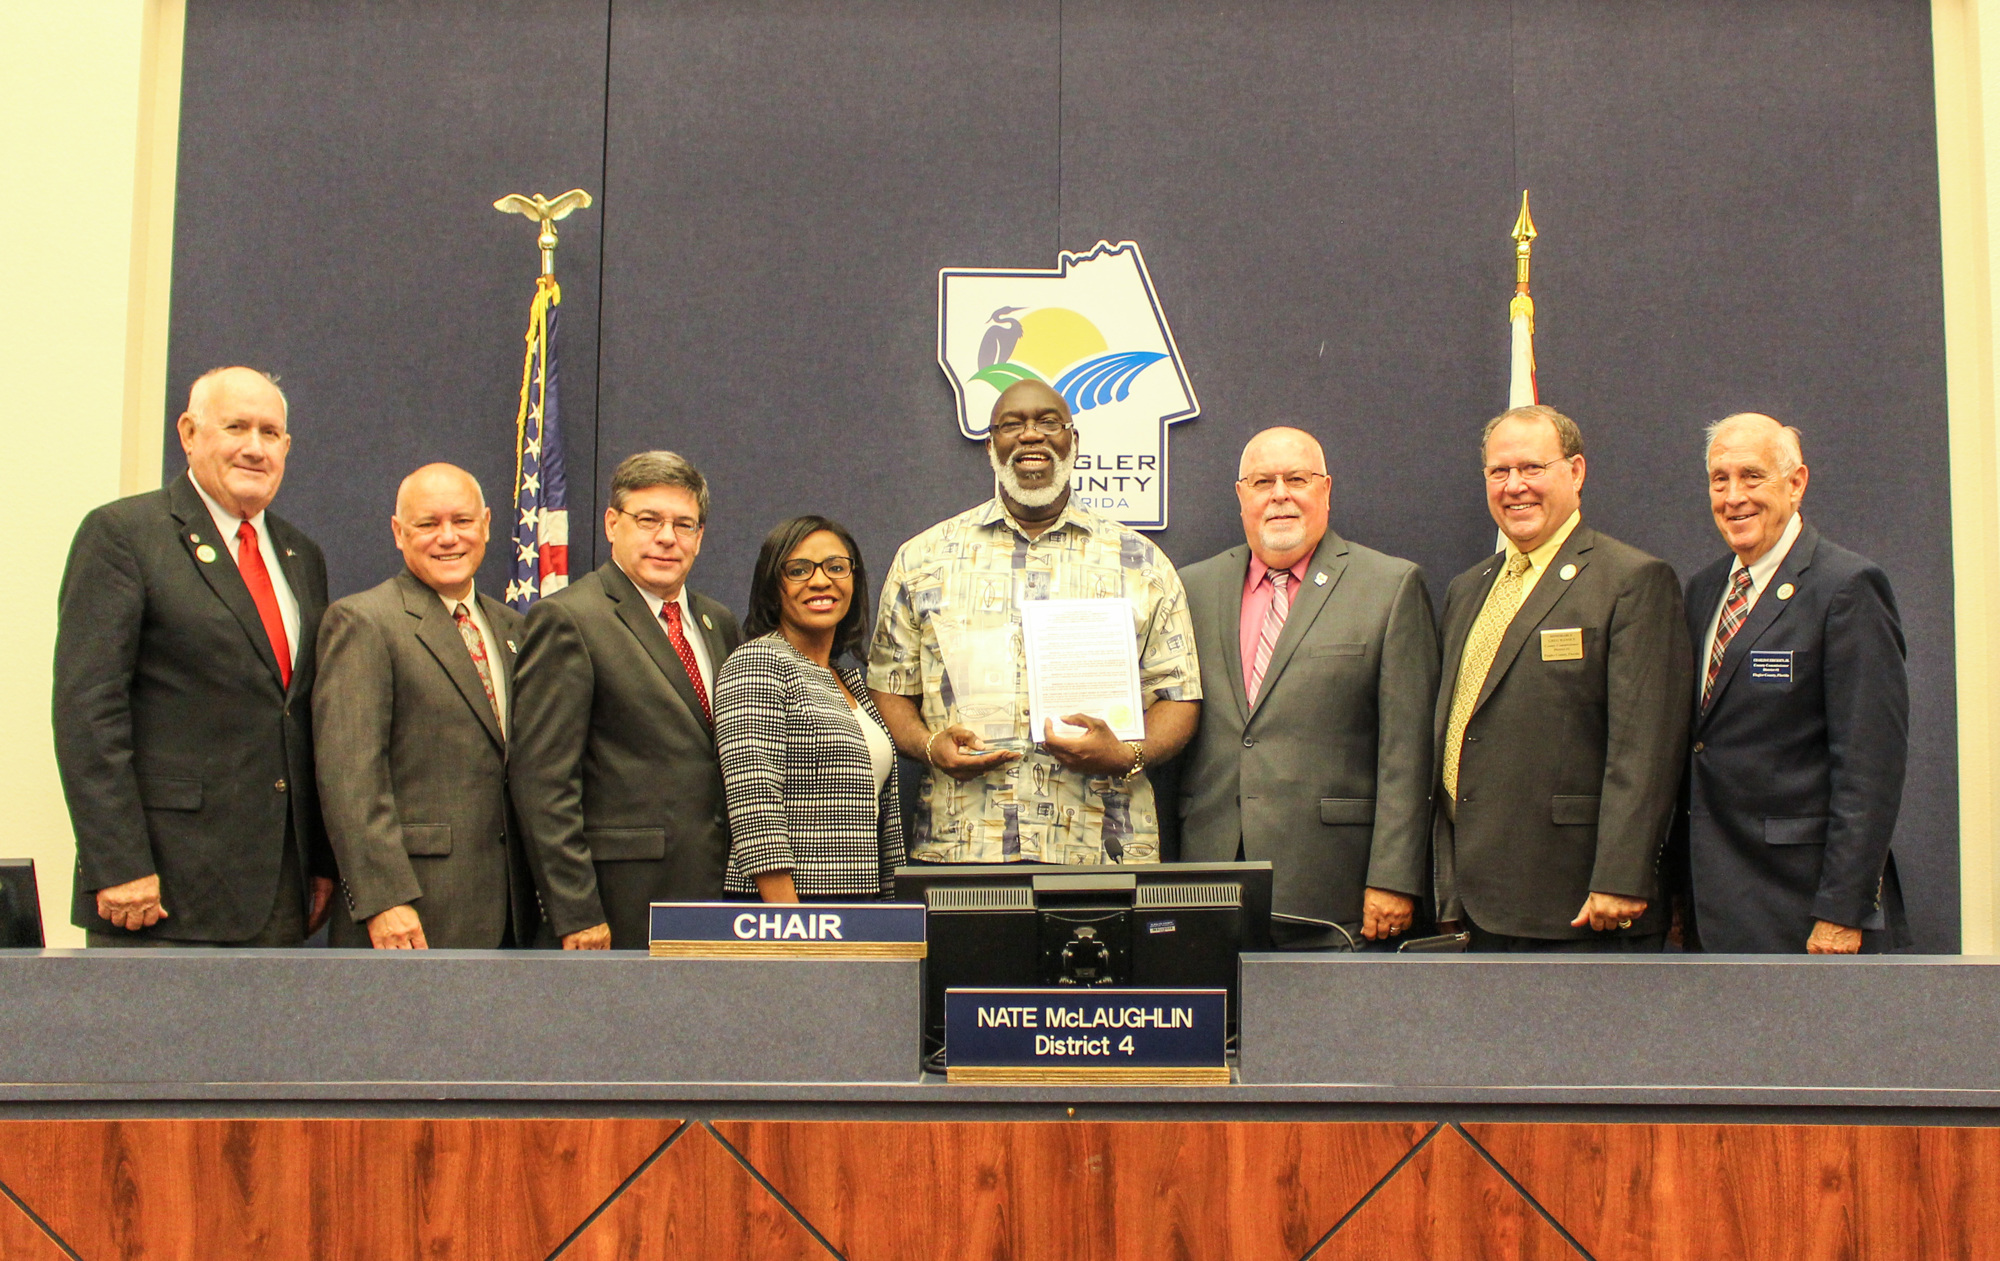 Representatives of the Northeast Florida Community Action Agency presented Emanuel with the award at the Aug. 7 regular meeting of the Board of County Commissioners. Photo courtesy Flagler County administration